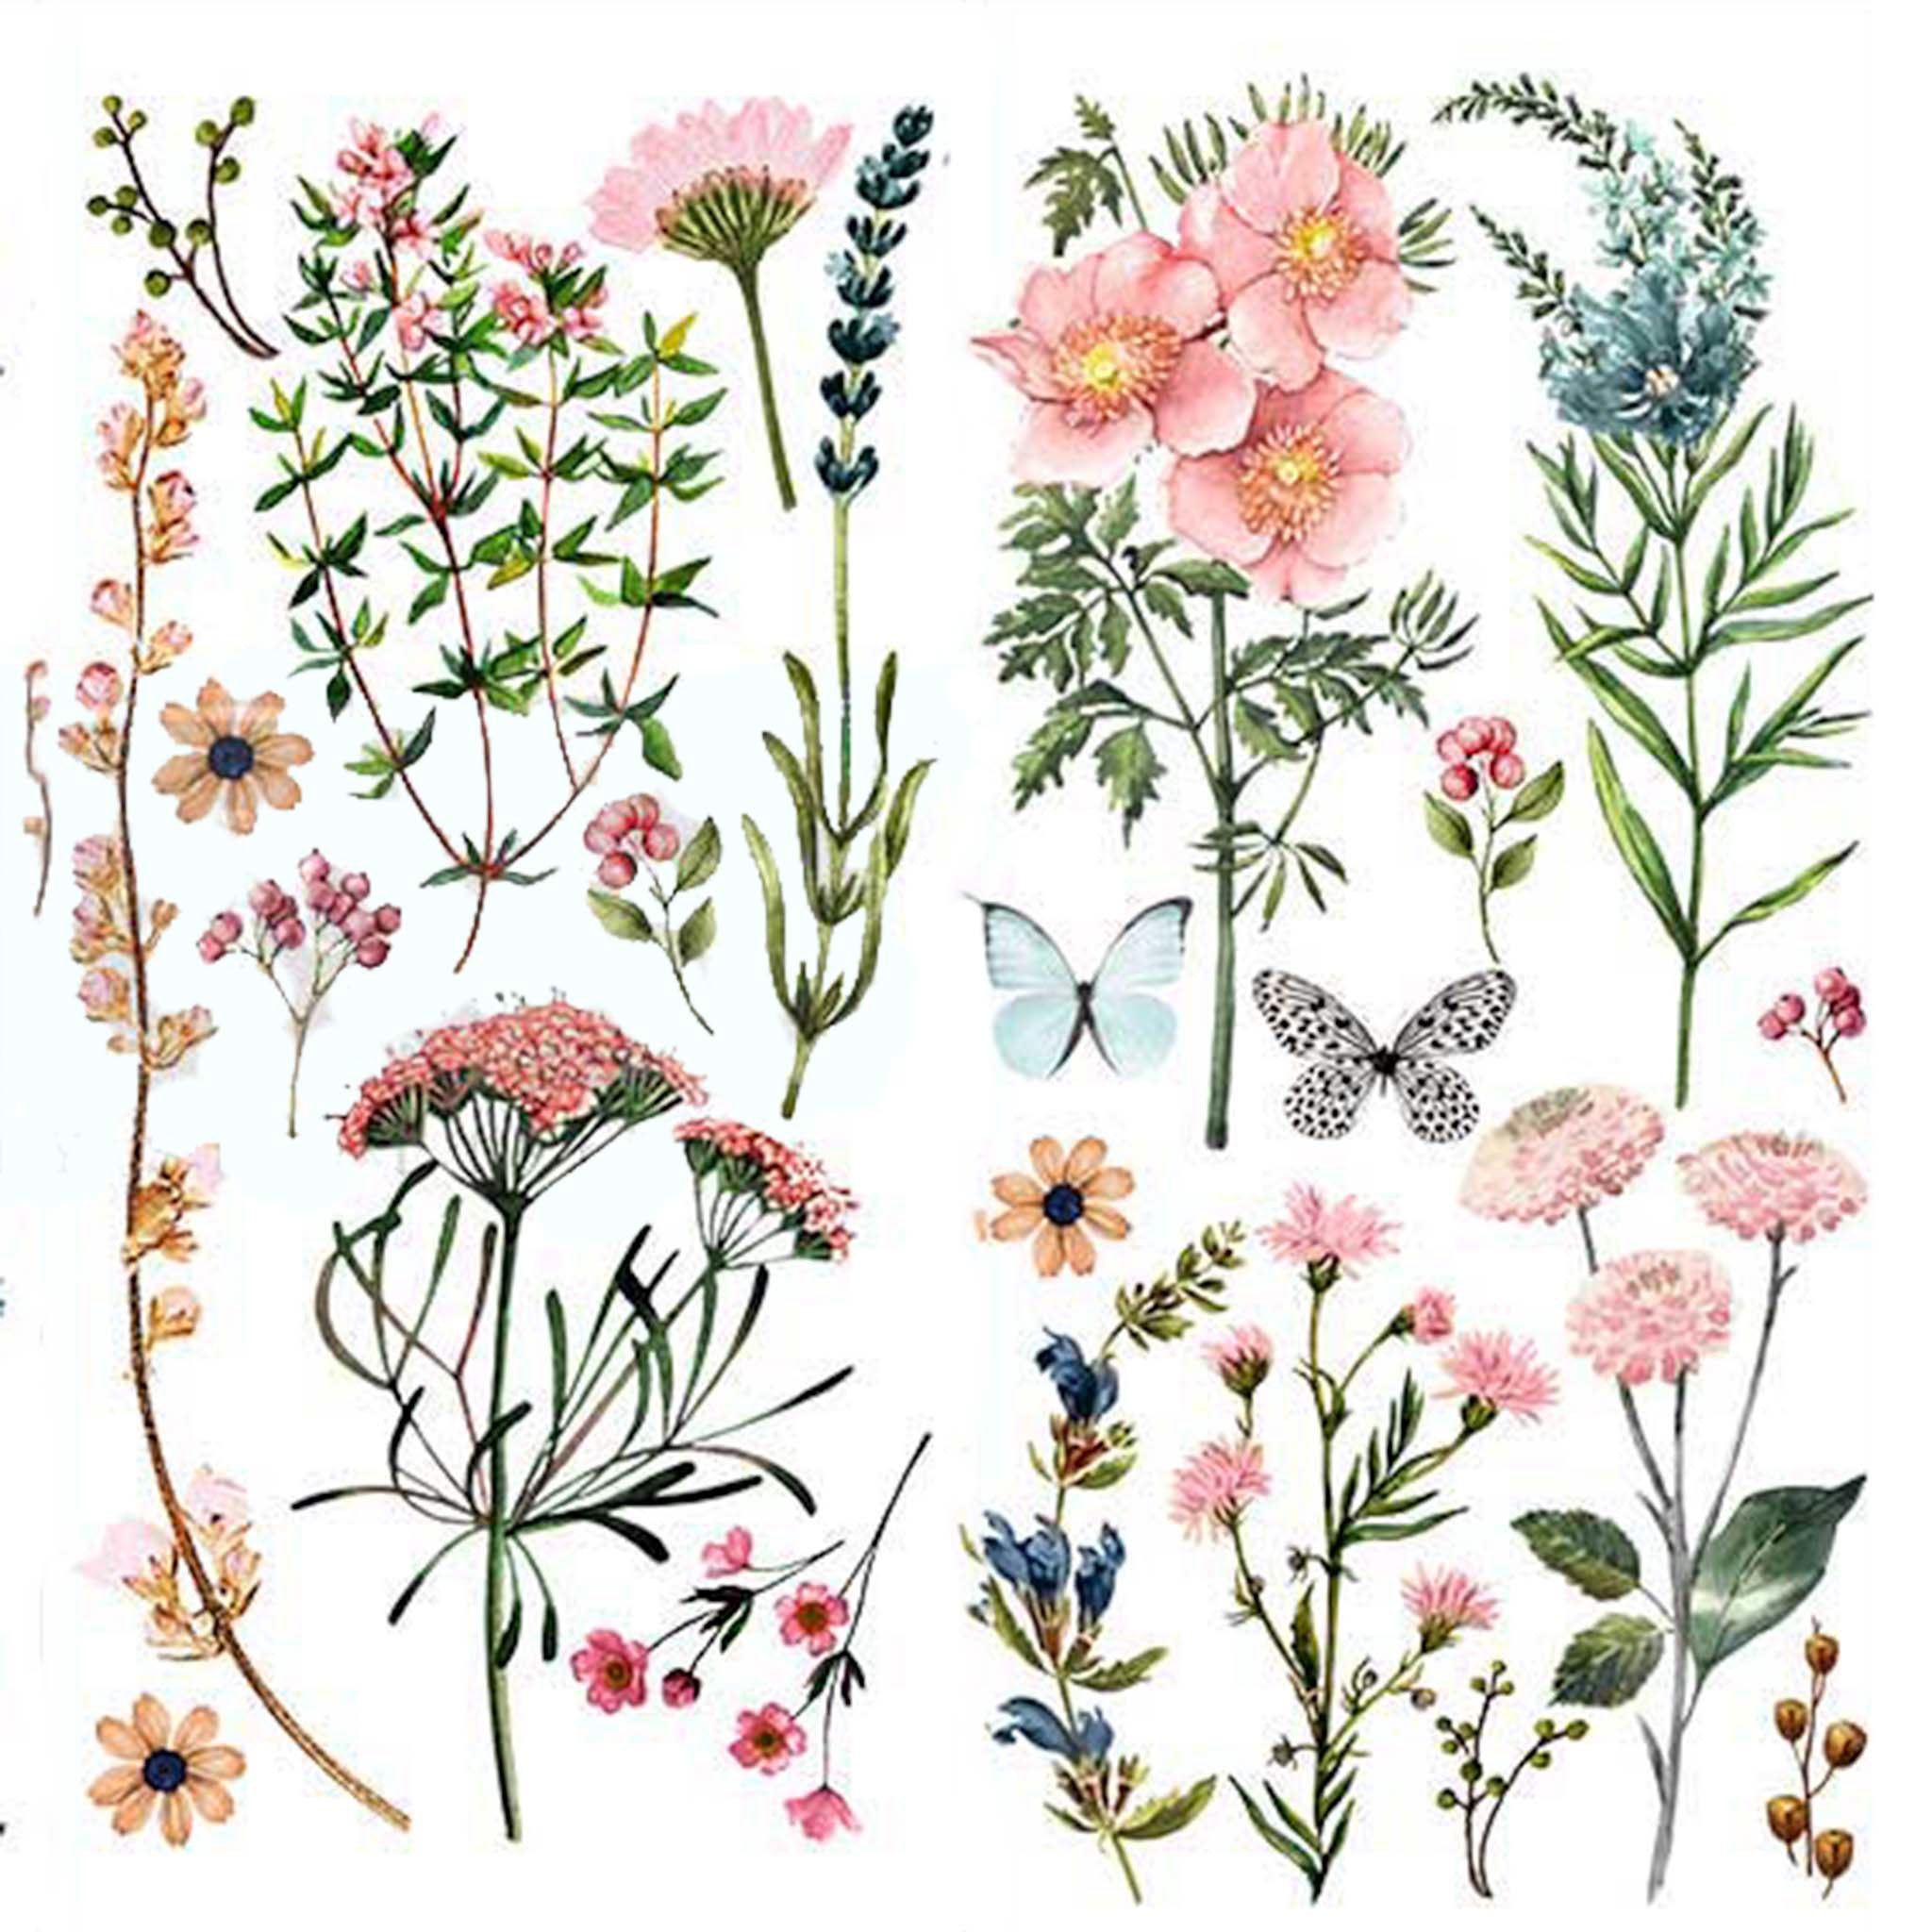 Rub-on transfer design of small wild flowers and butterflies.